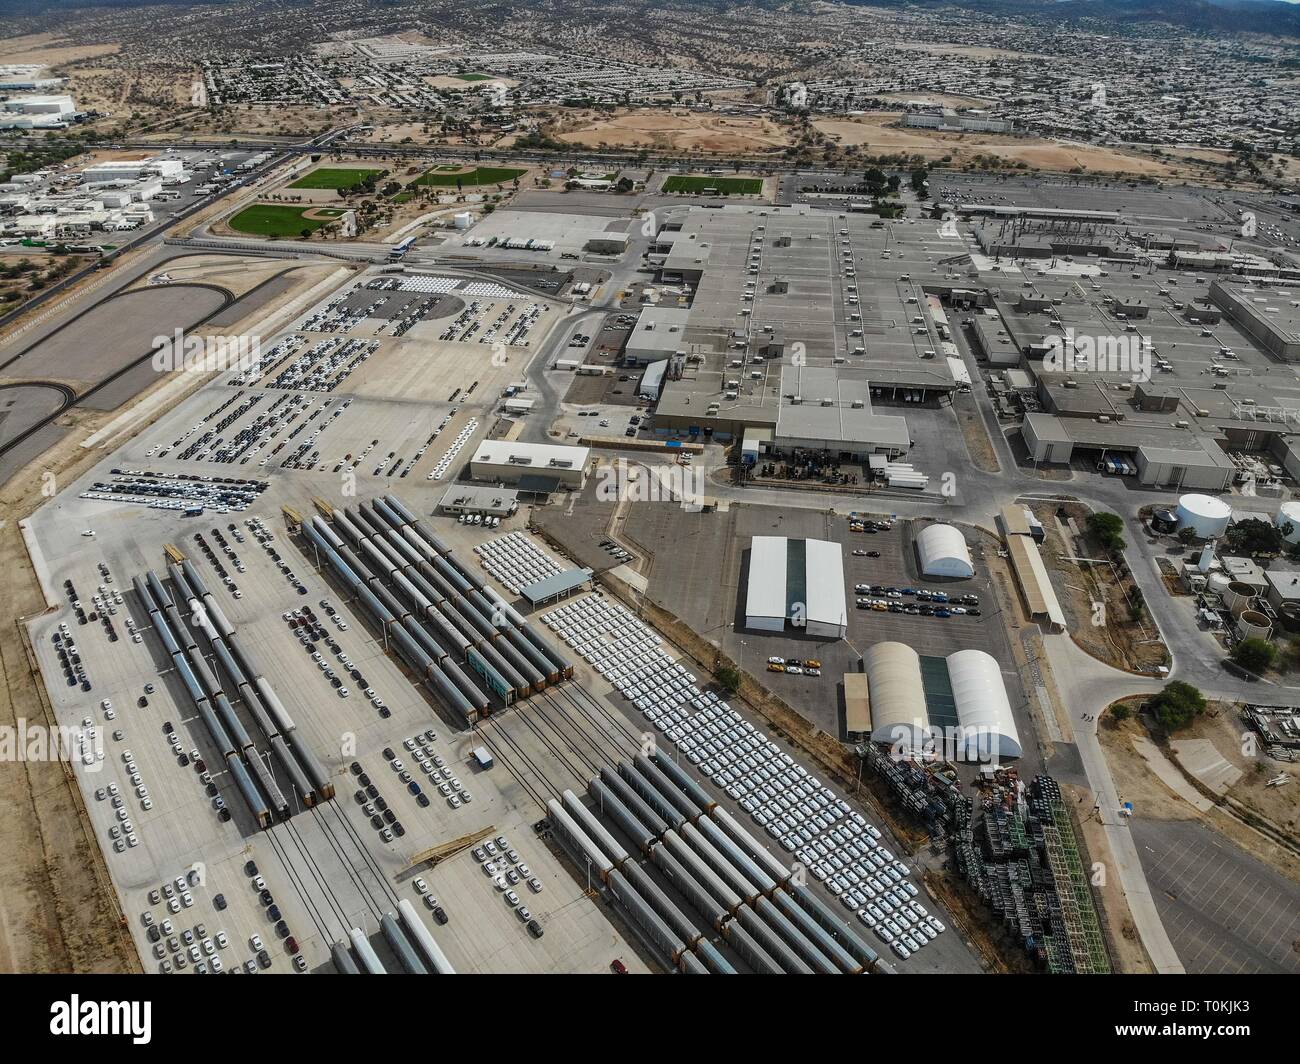 Aerial view of the Ford Motor Company automotive company in the Hermosillo industrial park. Automotive industry. Hermosillo Stamping and Assembly is an automobile assembly plant of Ford Motor Company located in Hermosillo, Sonora, Mexico. The plant currently assembles the Ford Fusion and Lincoln MKZ, Lincoln models for the North American market. Ford is an American multinational automaker . Photo: (NortePhoto / LuisGutierrez) ... keywords: dji, aerial, djimavic, mavicair, aerial photo, aerial photography, urban landscape, aerial photography, aerial photo, urban, urban, urban, plane, architectu Stock Photo